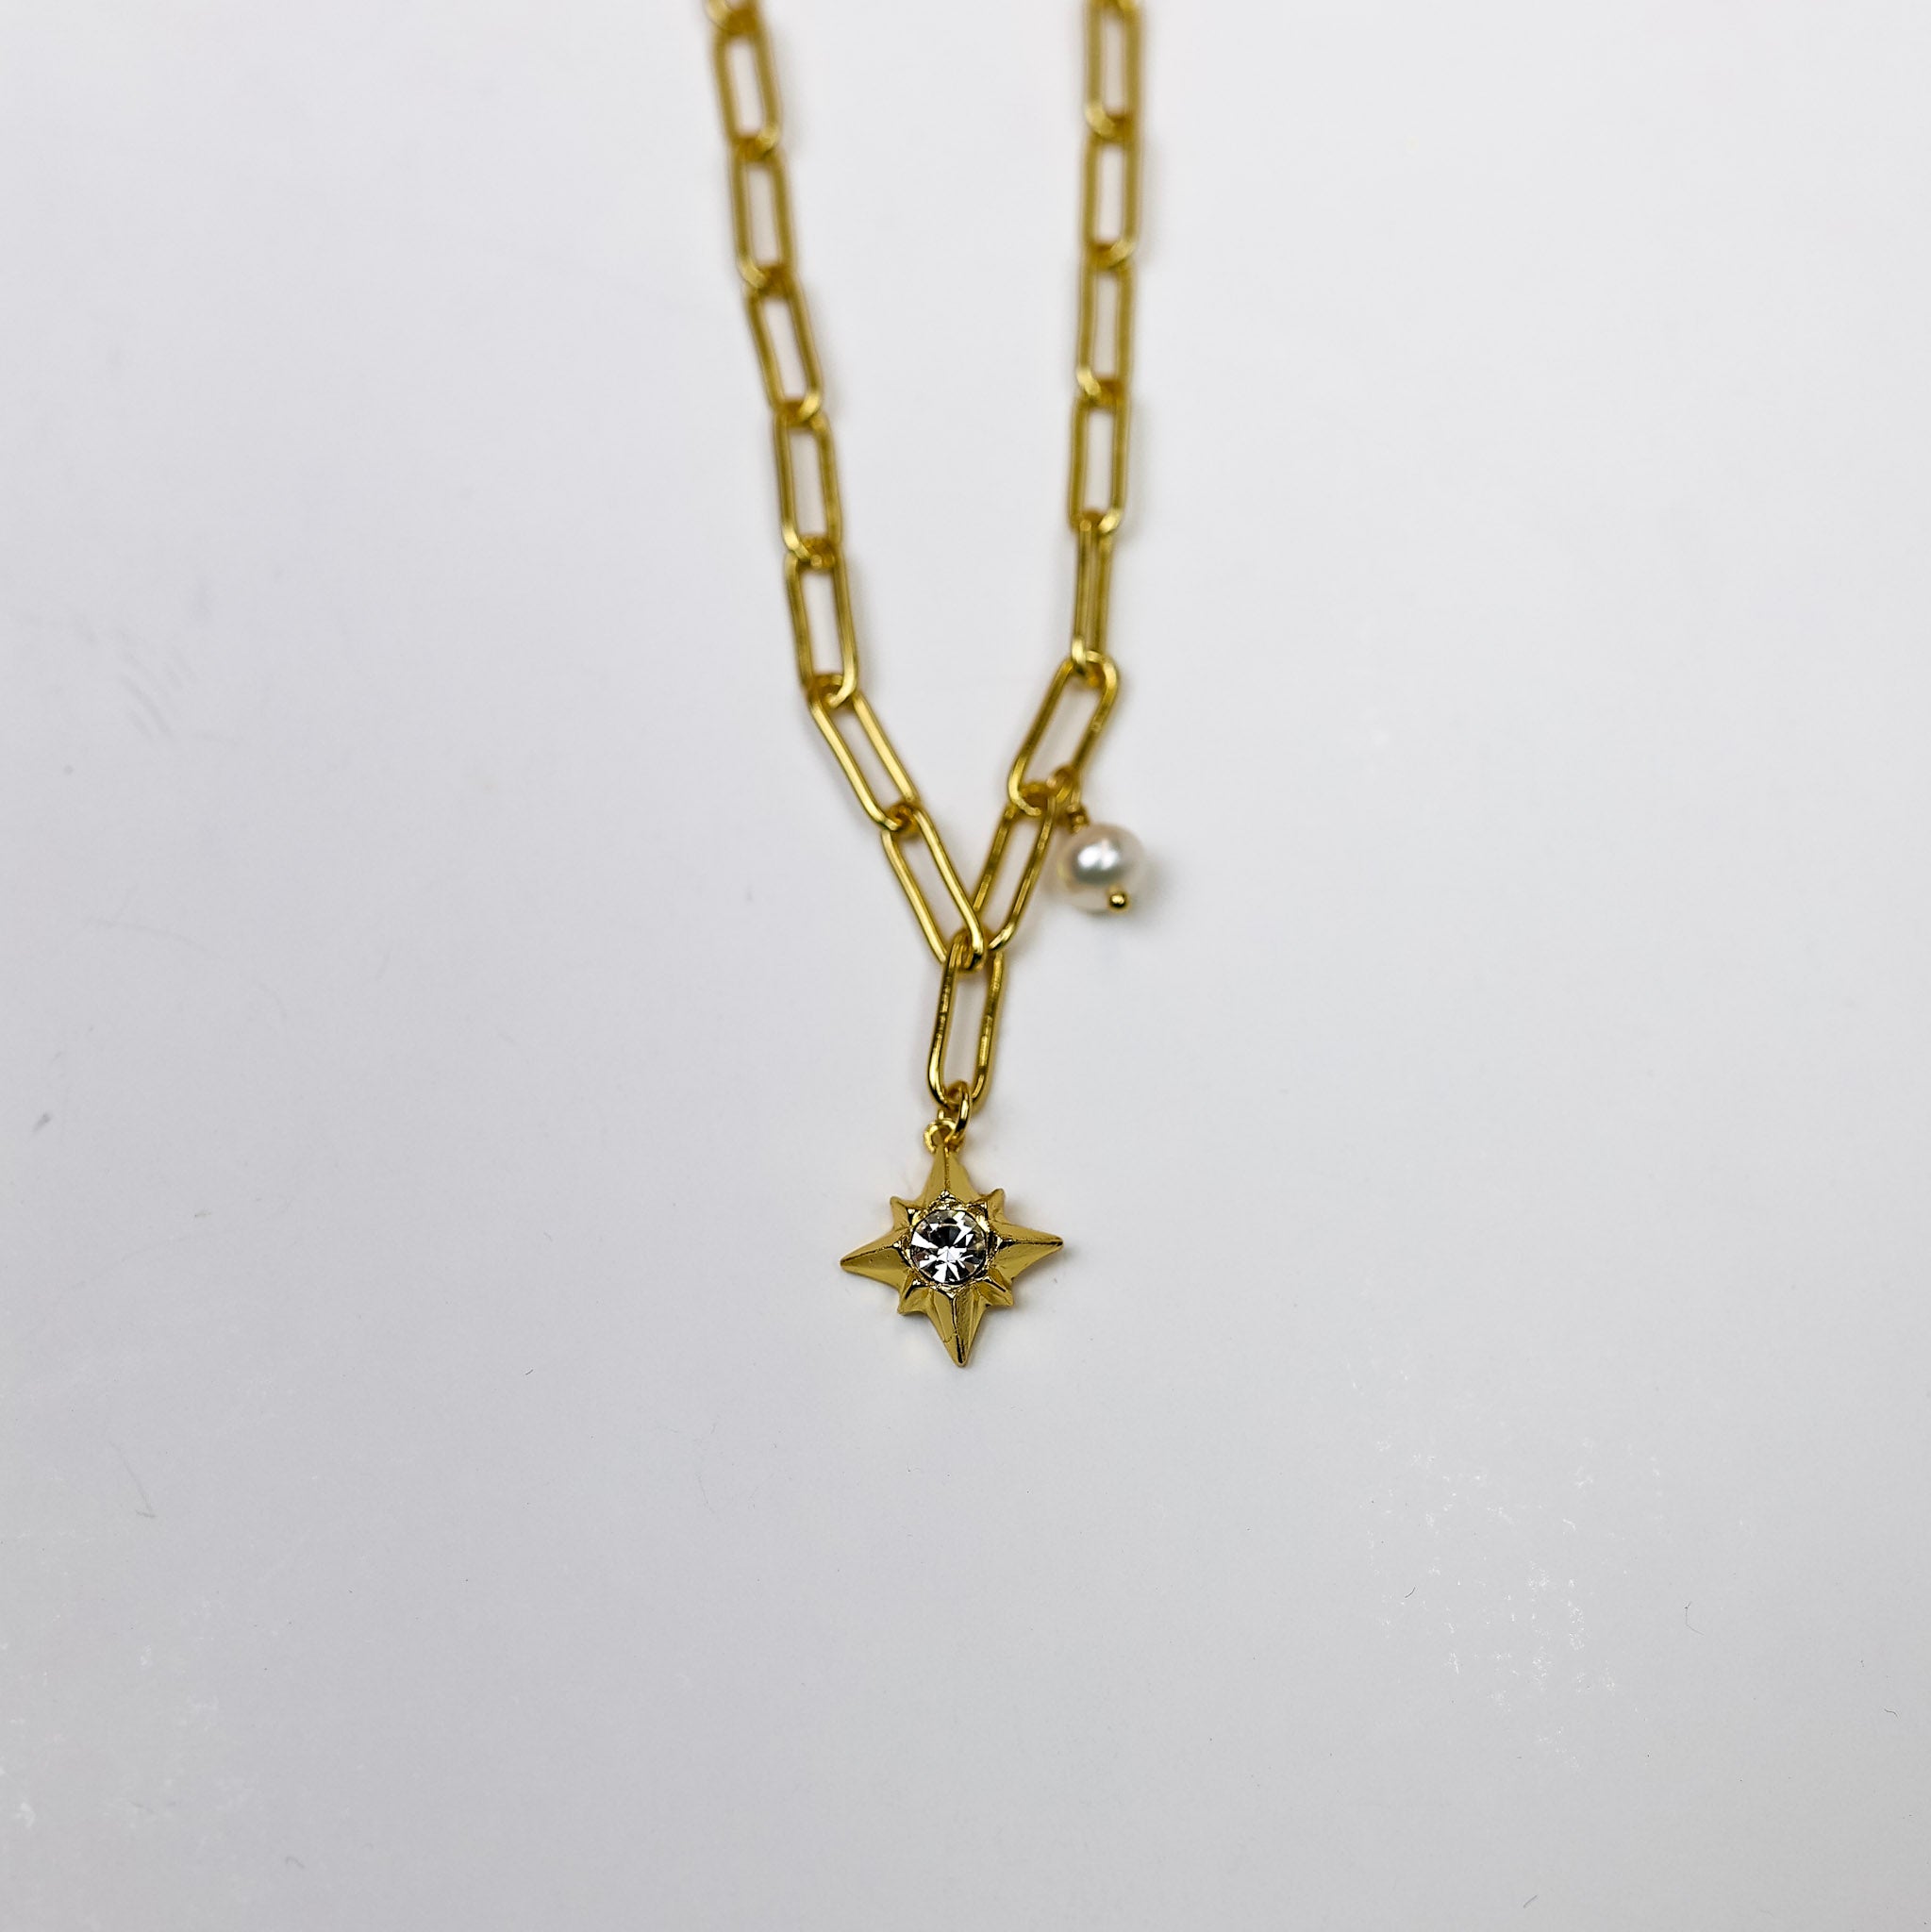 A gold-tone chain necklace with a small pearl pendant and star pendant with a crystal at the center.